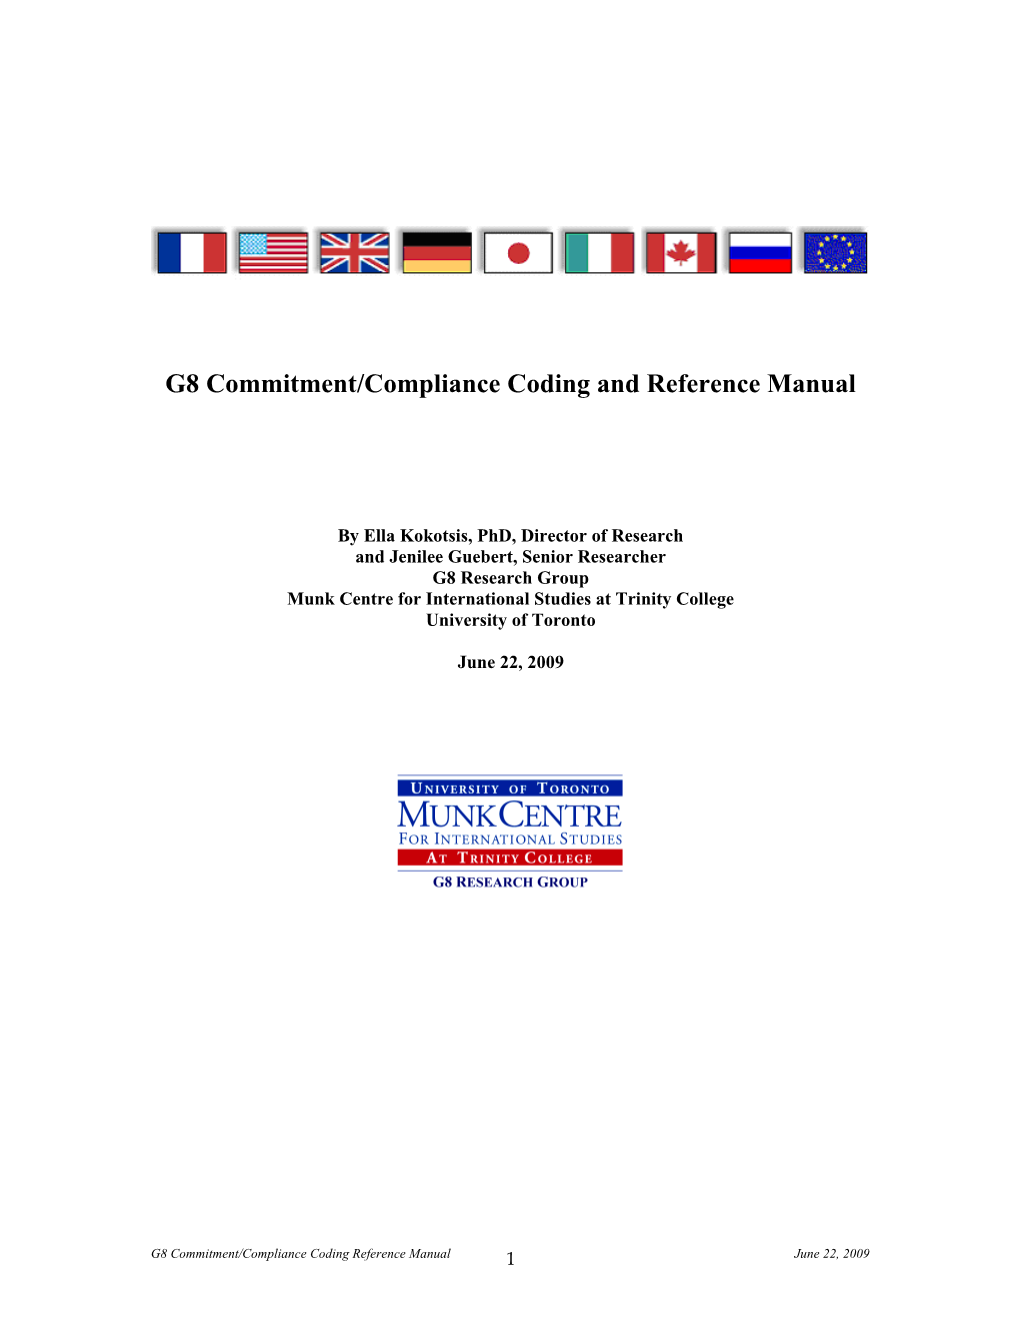 G8 Research Coding Manual